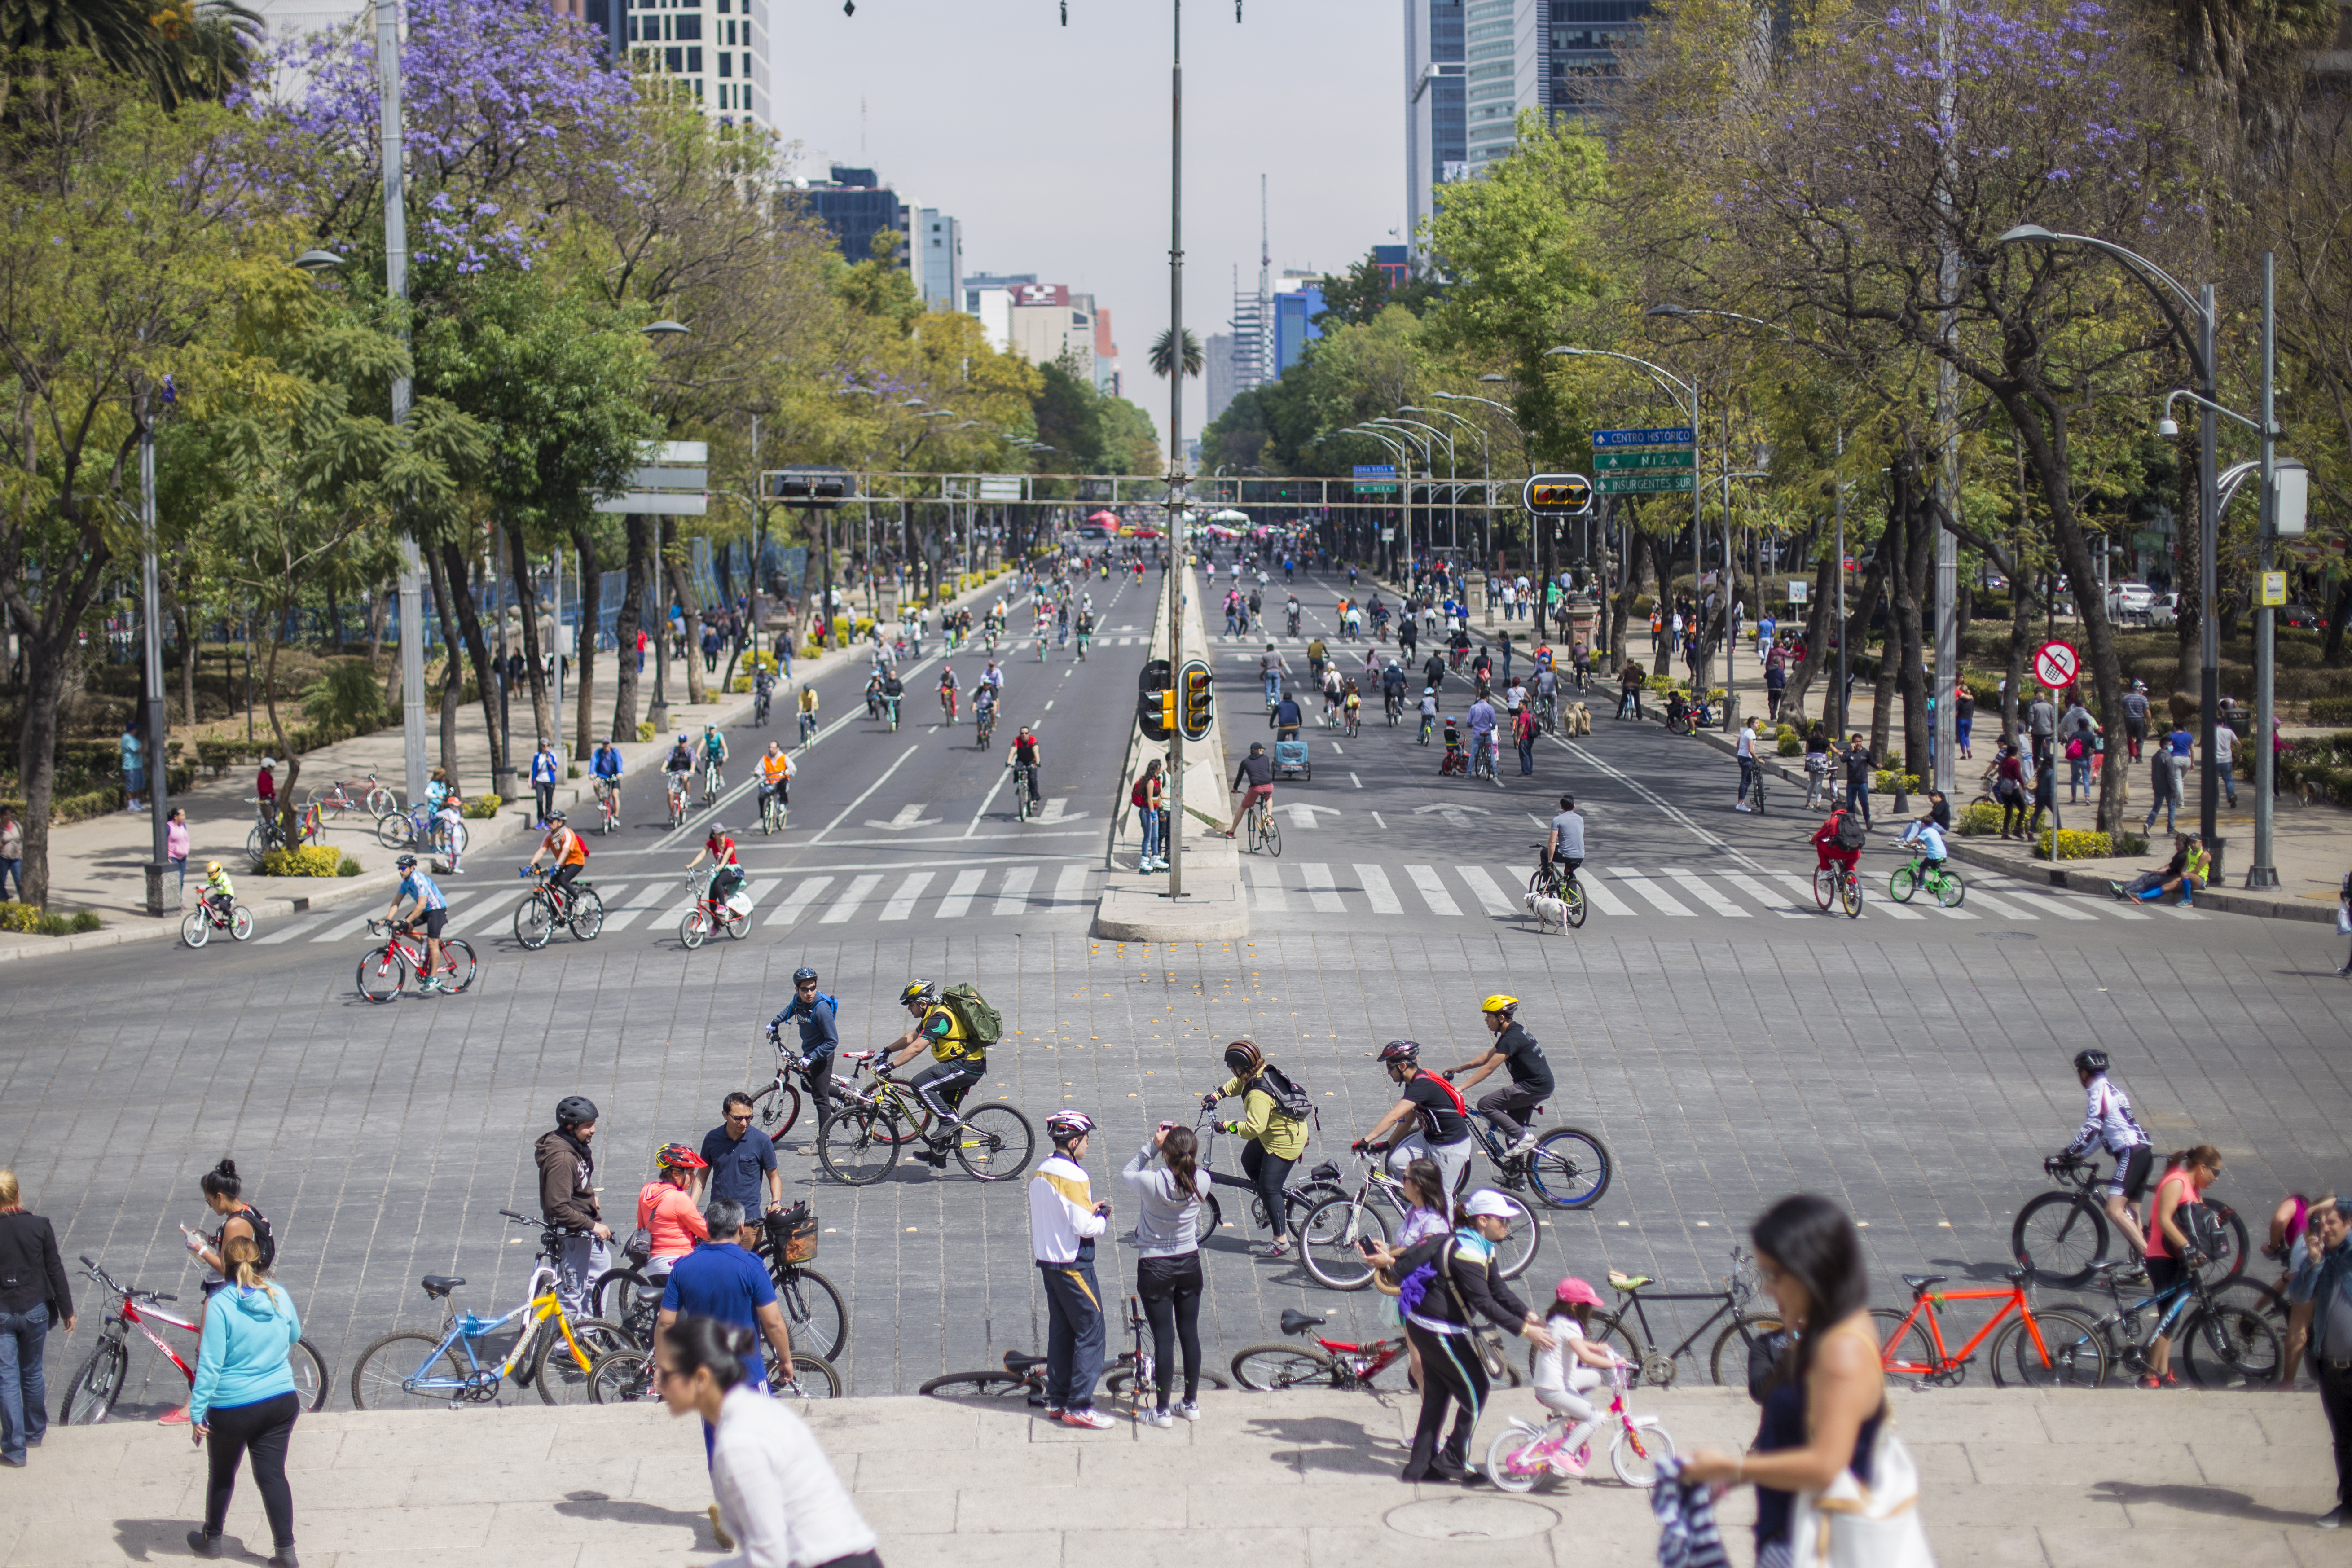 [Interactive Timeline] How Mexico City Became a Leader in Parking Reform